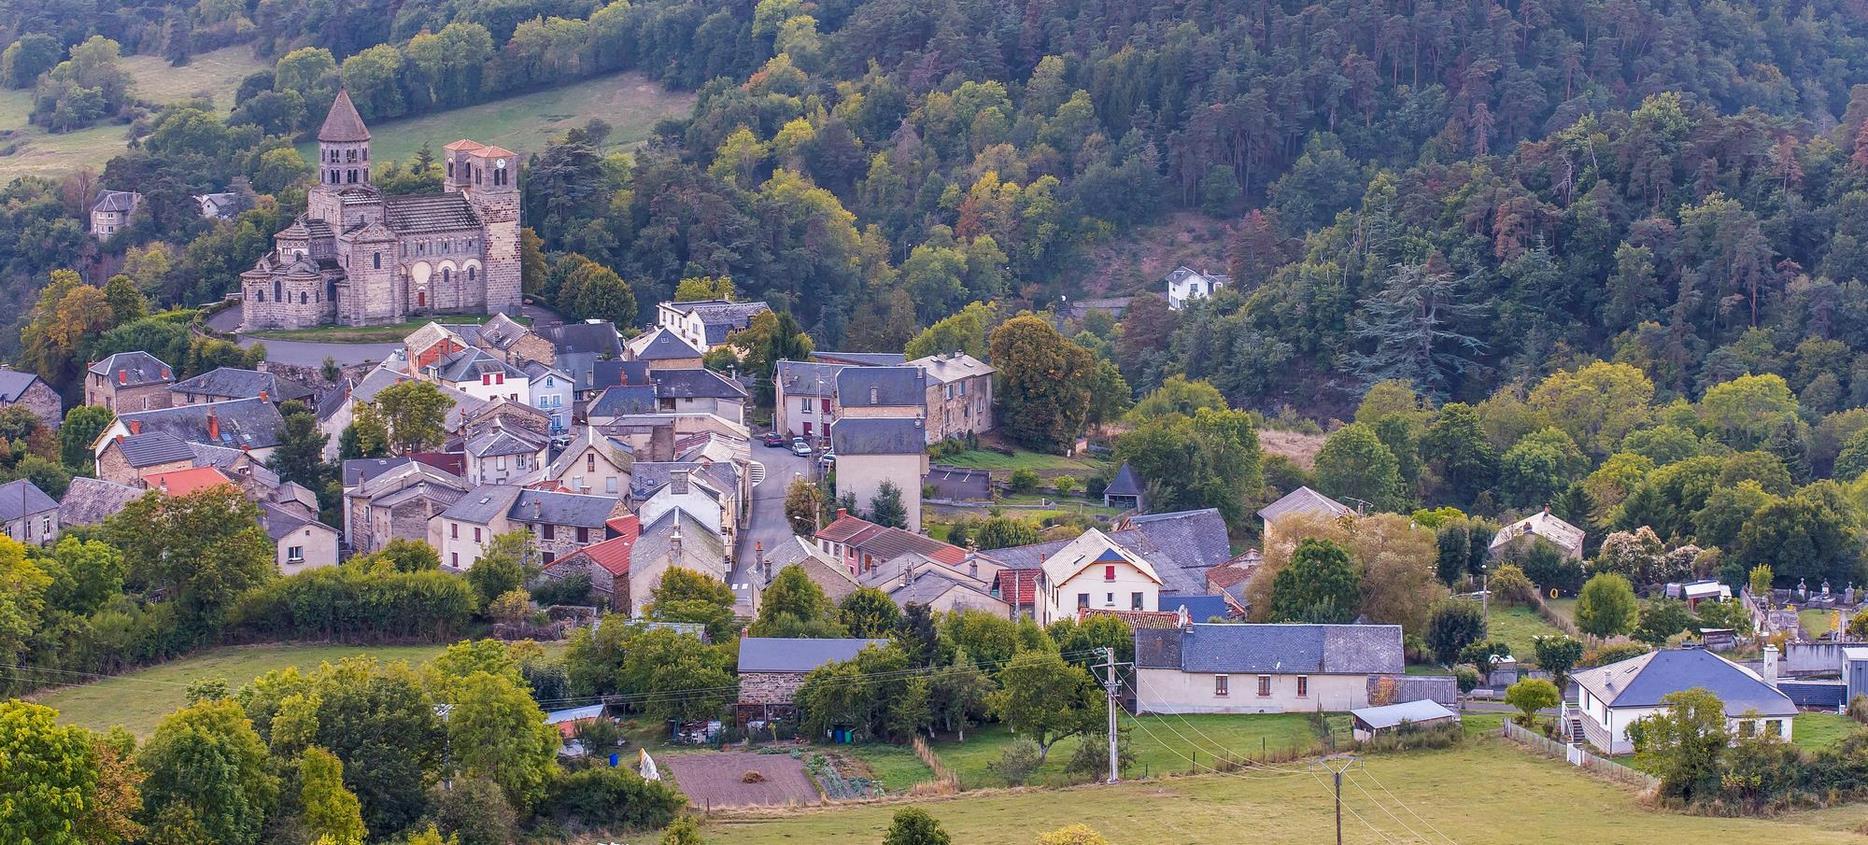 Super Besse - Aerial view of the Village of Saint Nectaire